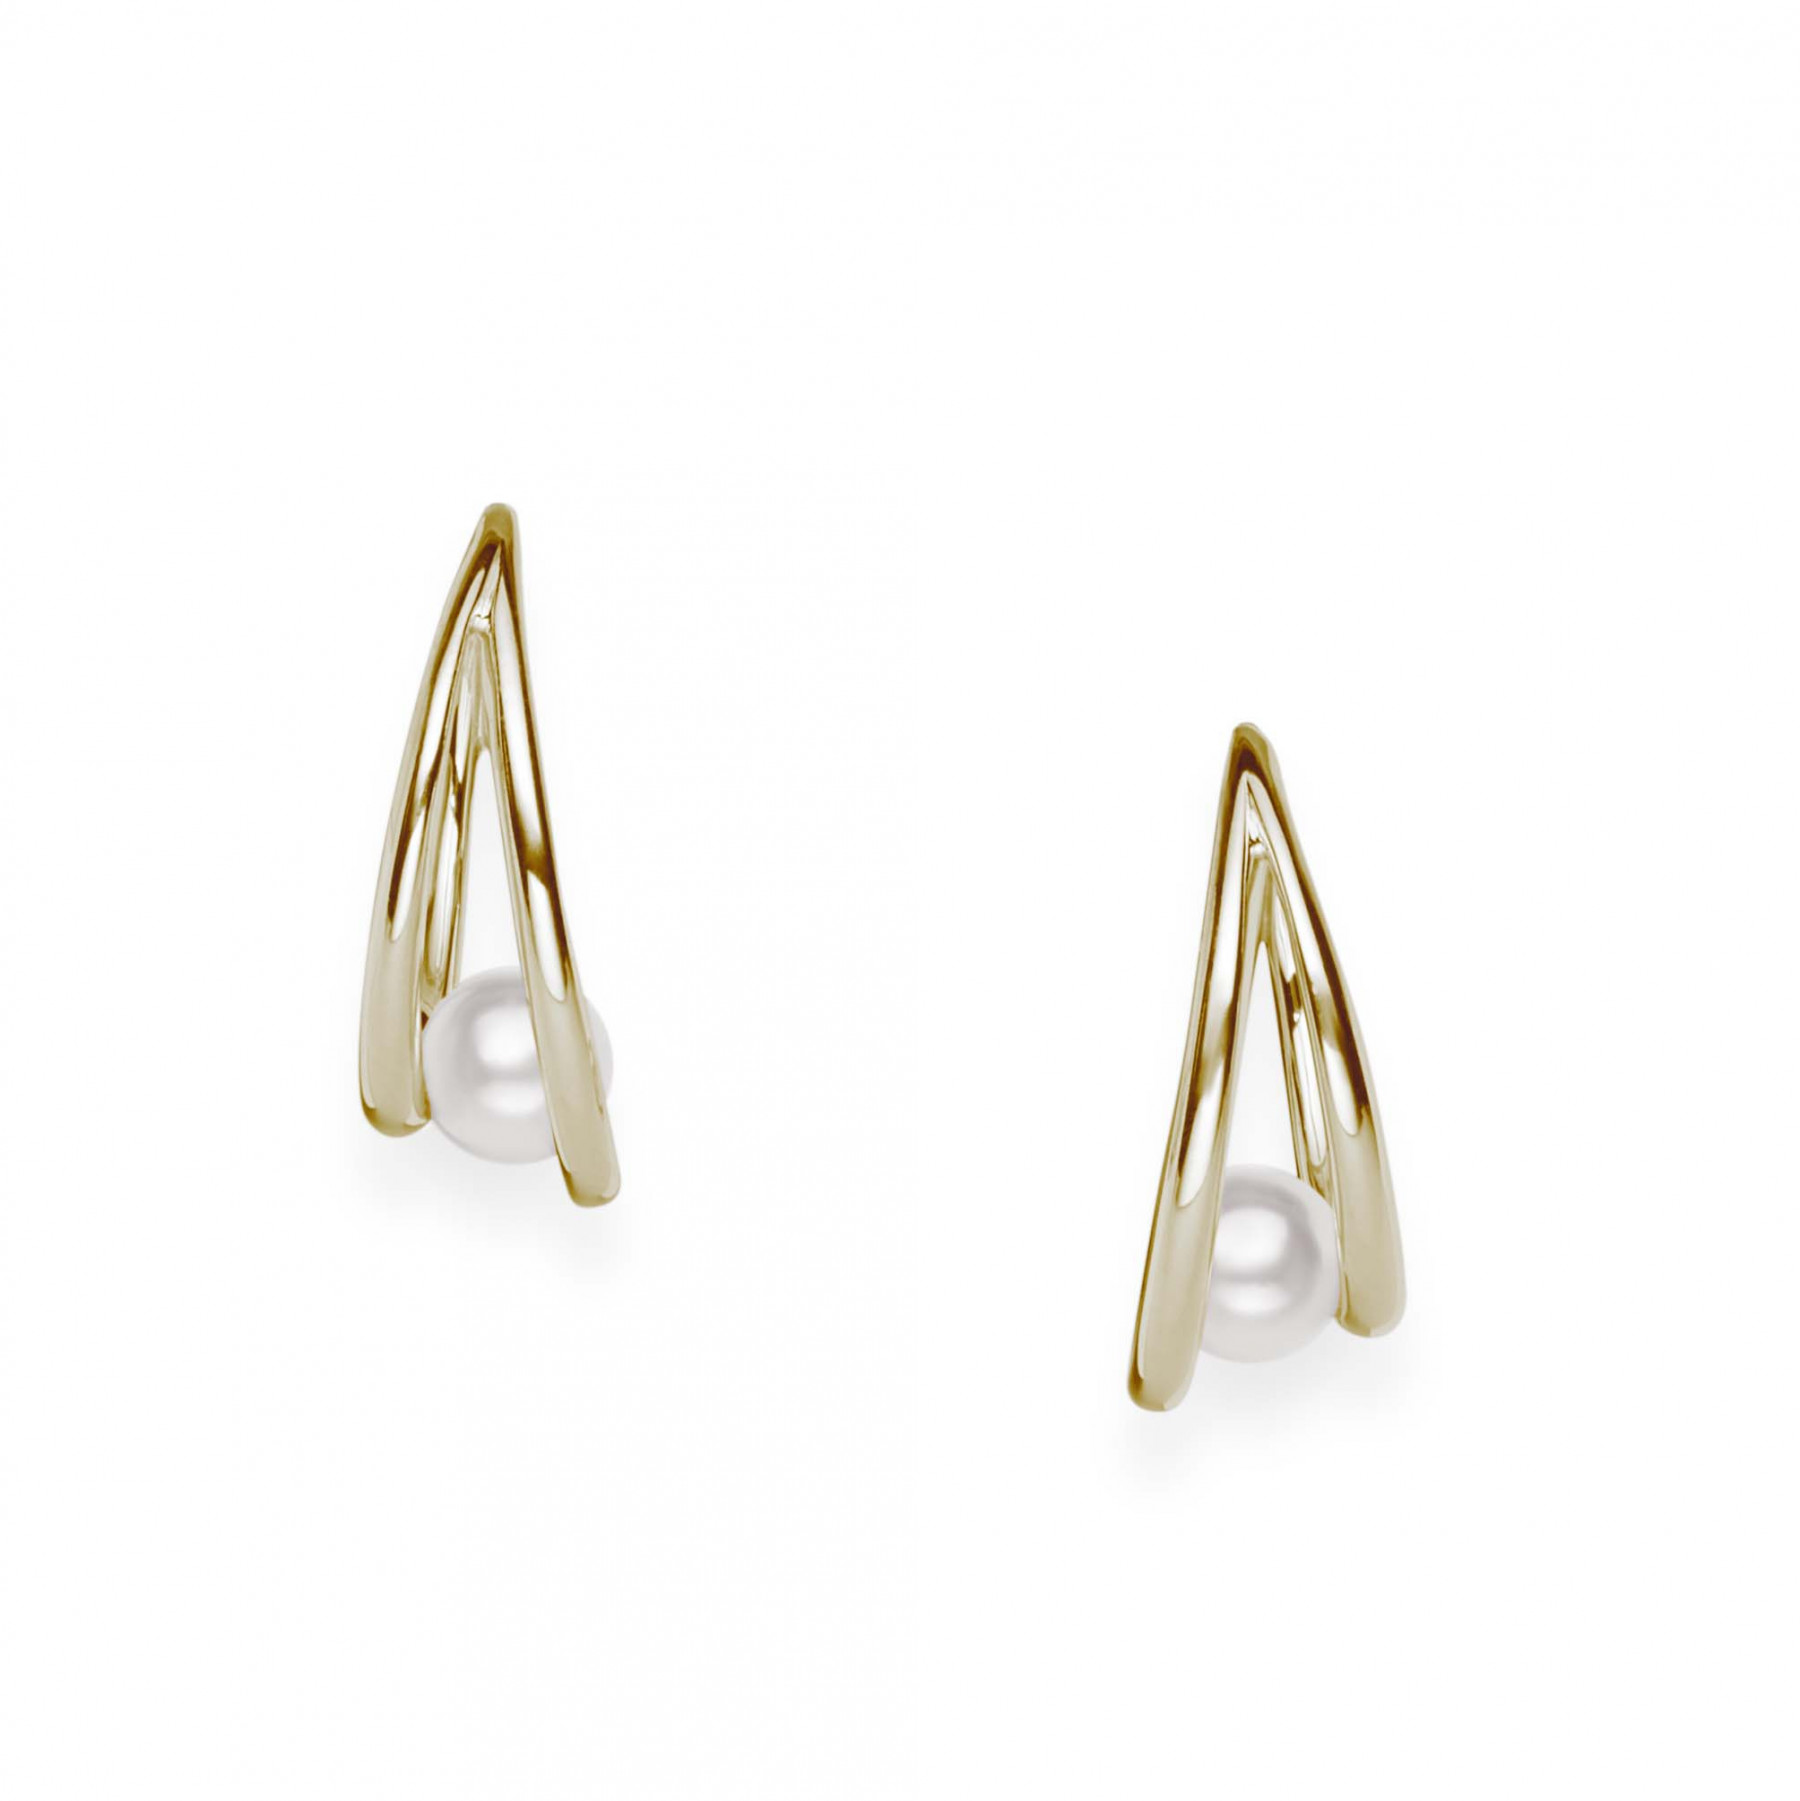 Mikimoto Akoya Cultured Pearl Earrings in Yellow Gold
With 2= Round Akoya A+  Pearls